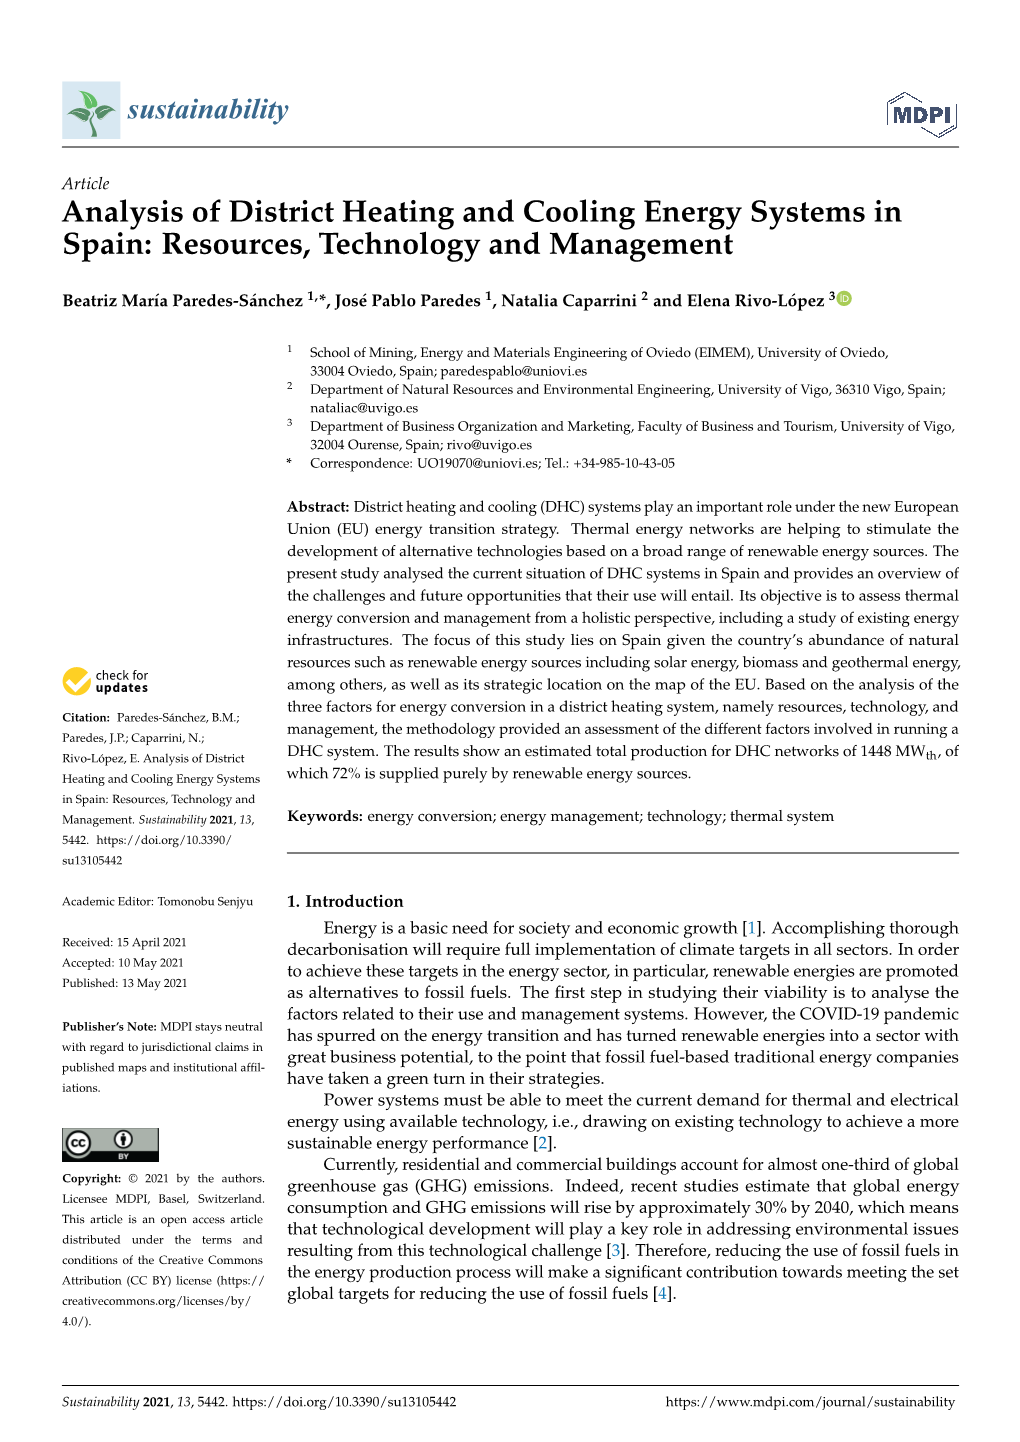 Analysis of District Heating and Cooling Energy Systems in Spain: Resources, Technology and Management